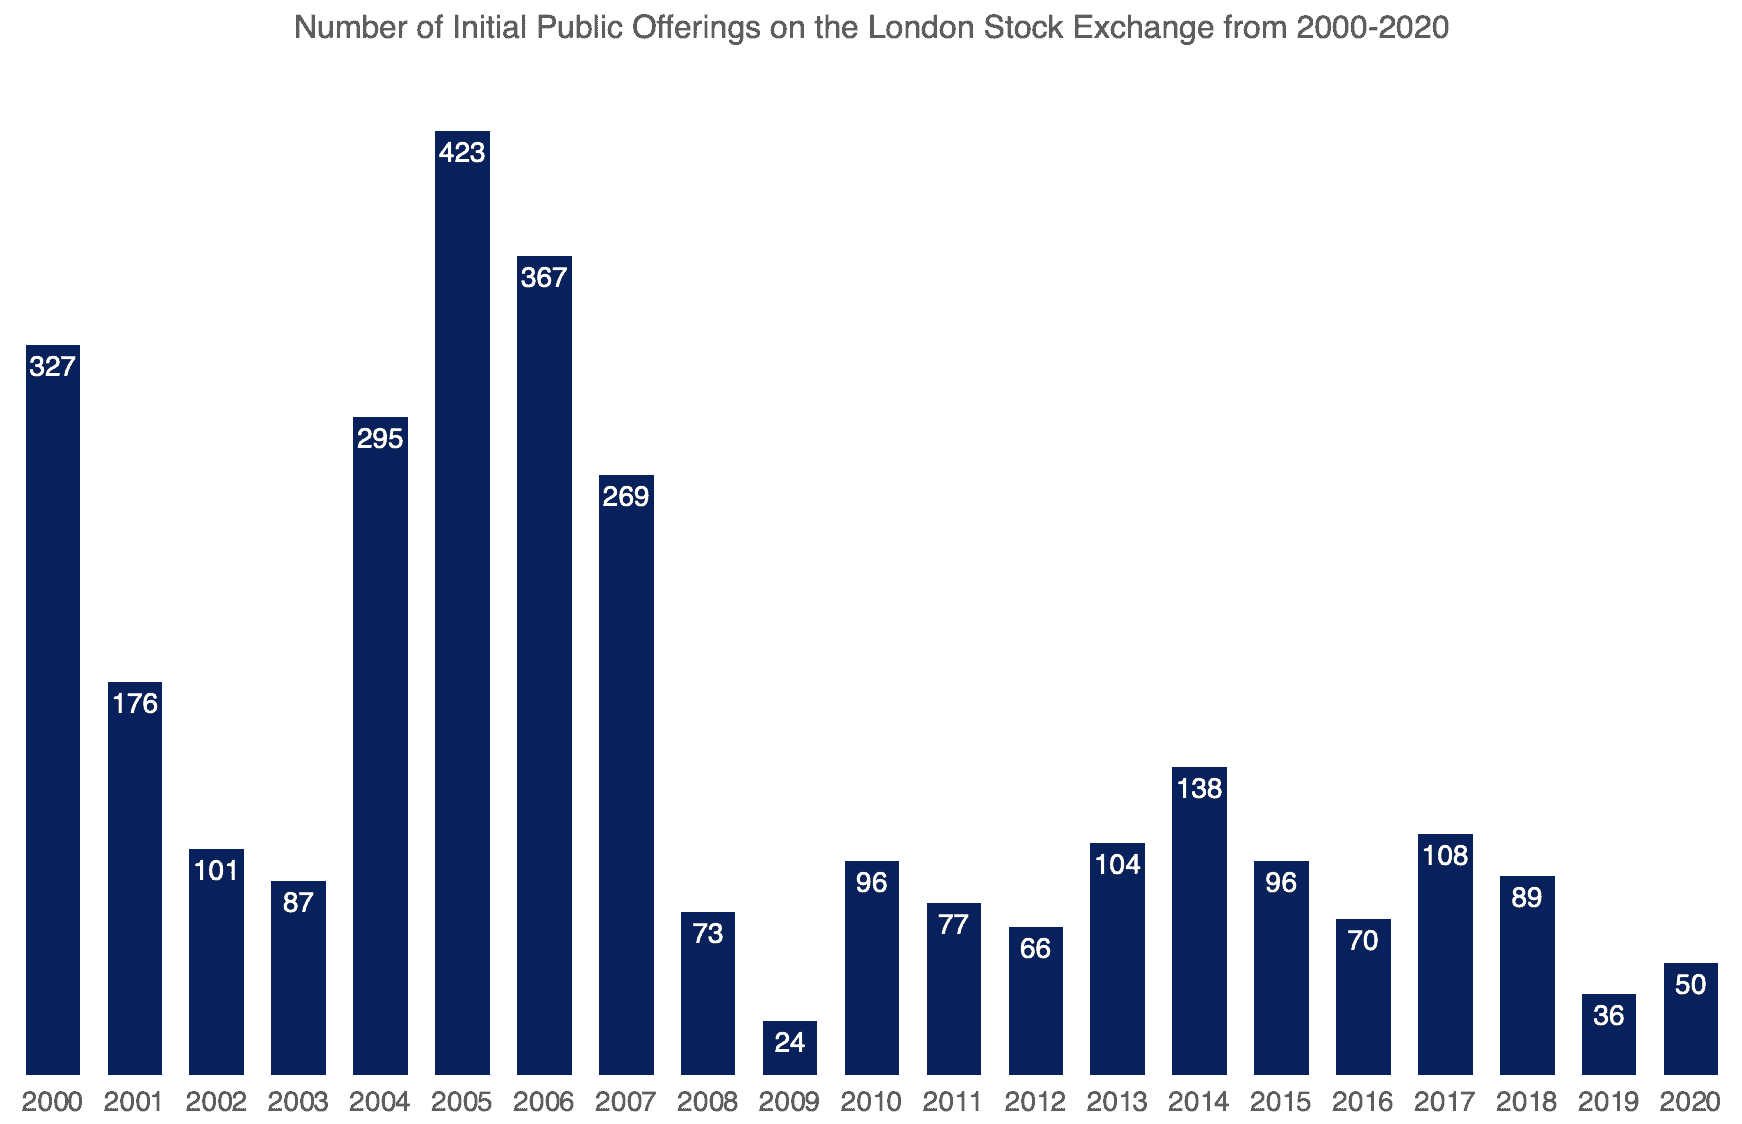 Number of IPOs on the London Stock Exchange from 2000 to 2020